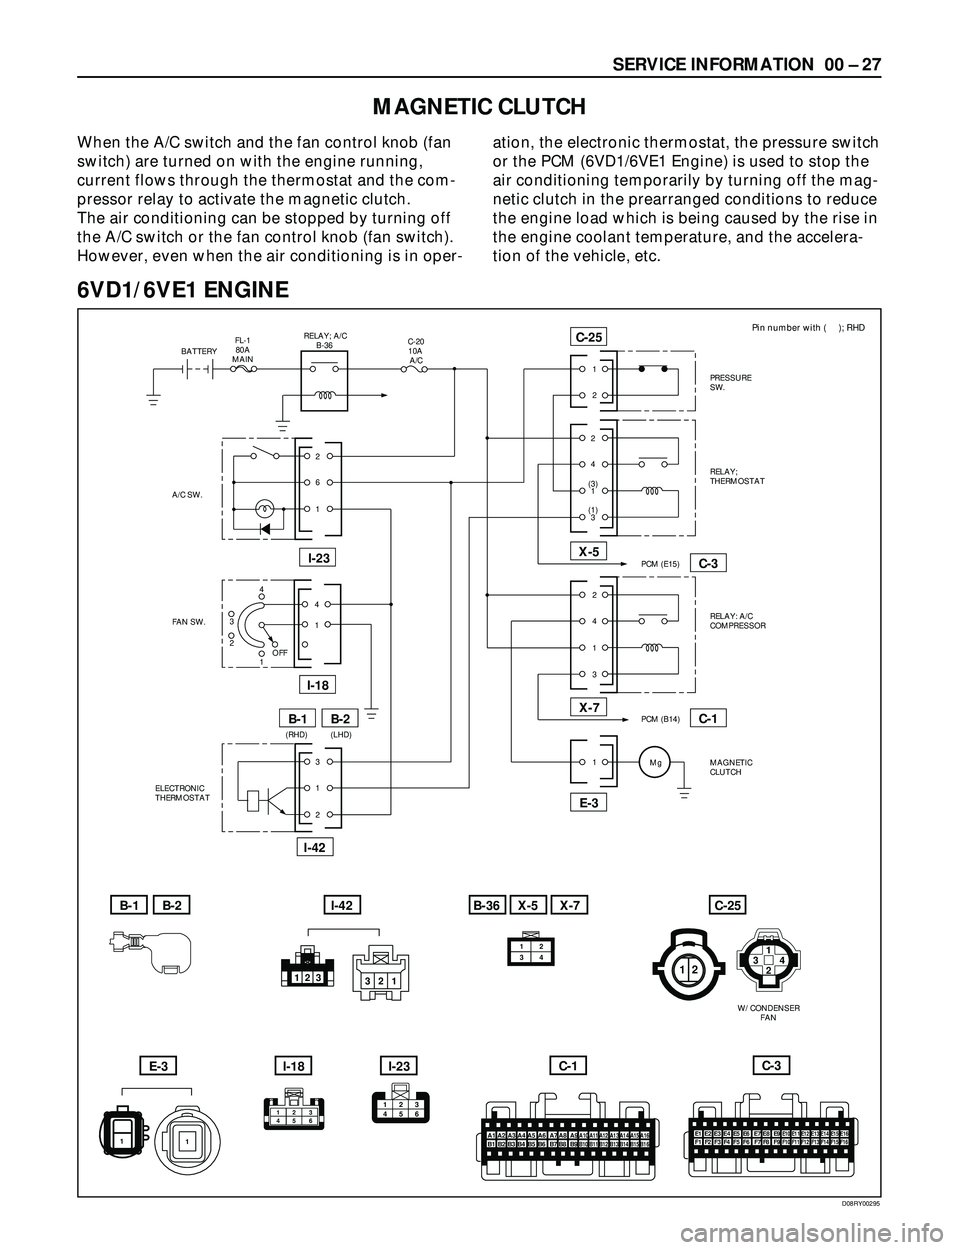 ISUZU TROOPER 1998  Service Manual PDF SERVICE INFORMATION  00 Ð 27
MAGNETIC CLUTCH
When the A/C switch and the fan control knob (fan
switch) are turned on with the engine running,
current flows through the thermostat and the com-
pressor